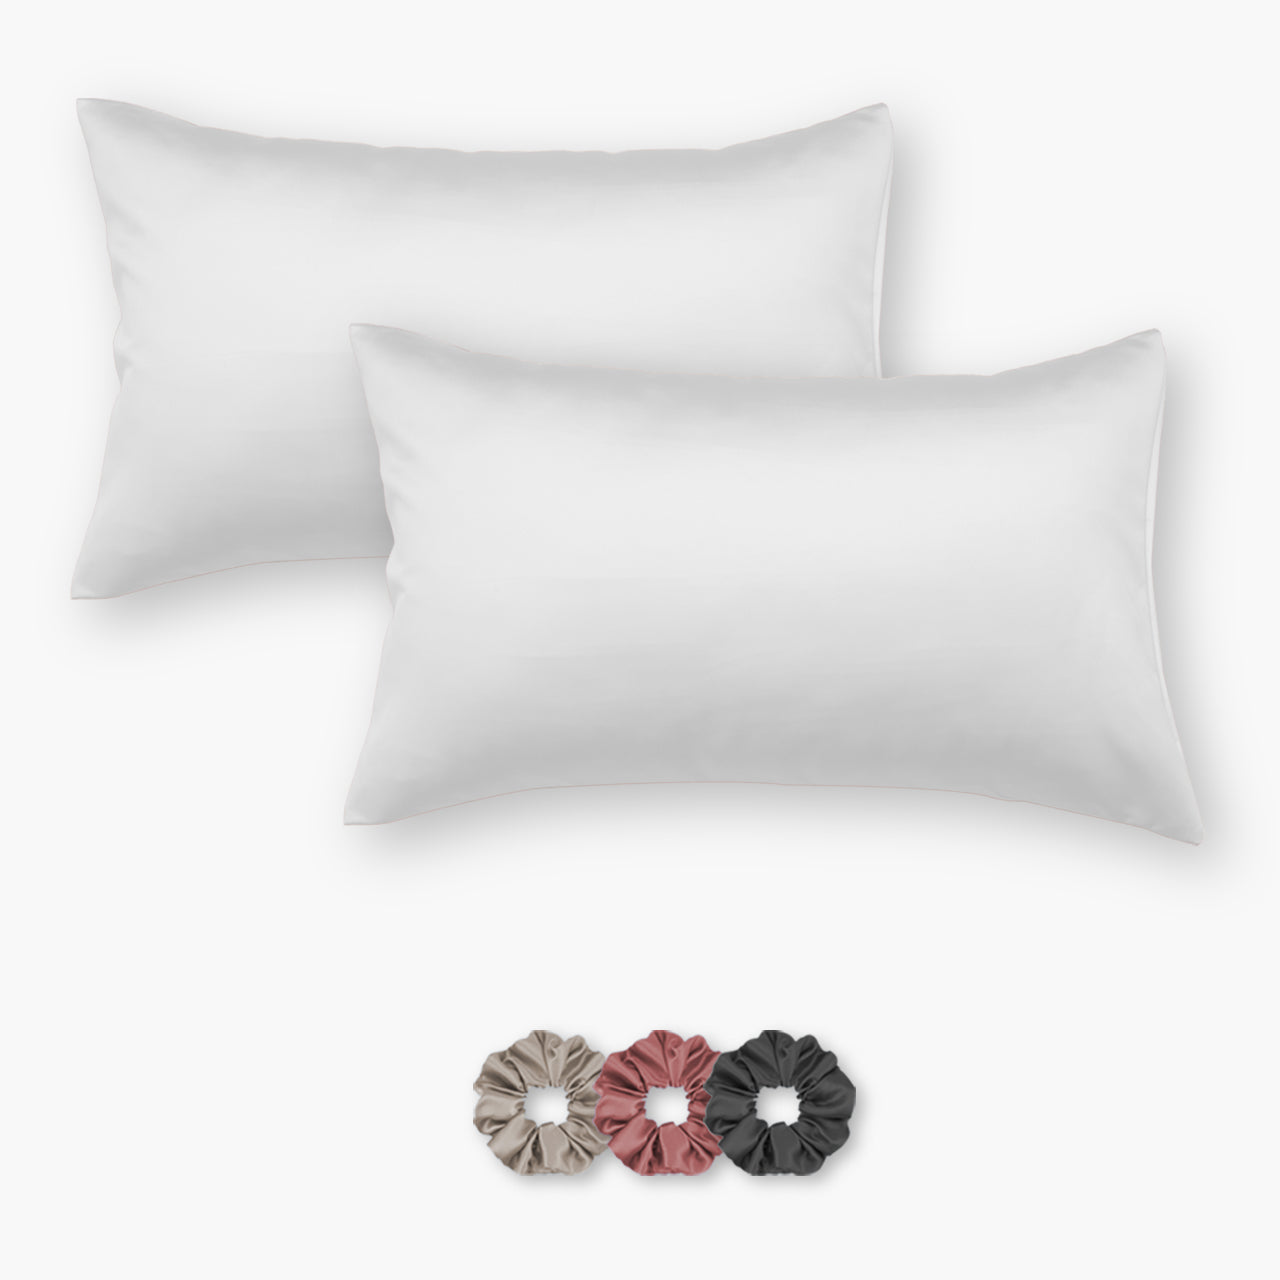 Satin Pillow Covers - Pack of 2 (With 3 free scrunchies)